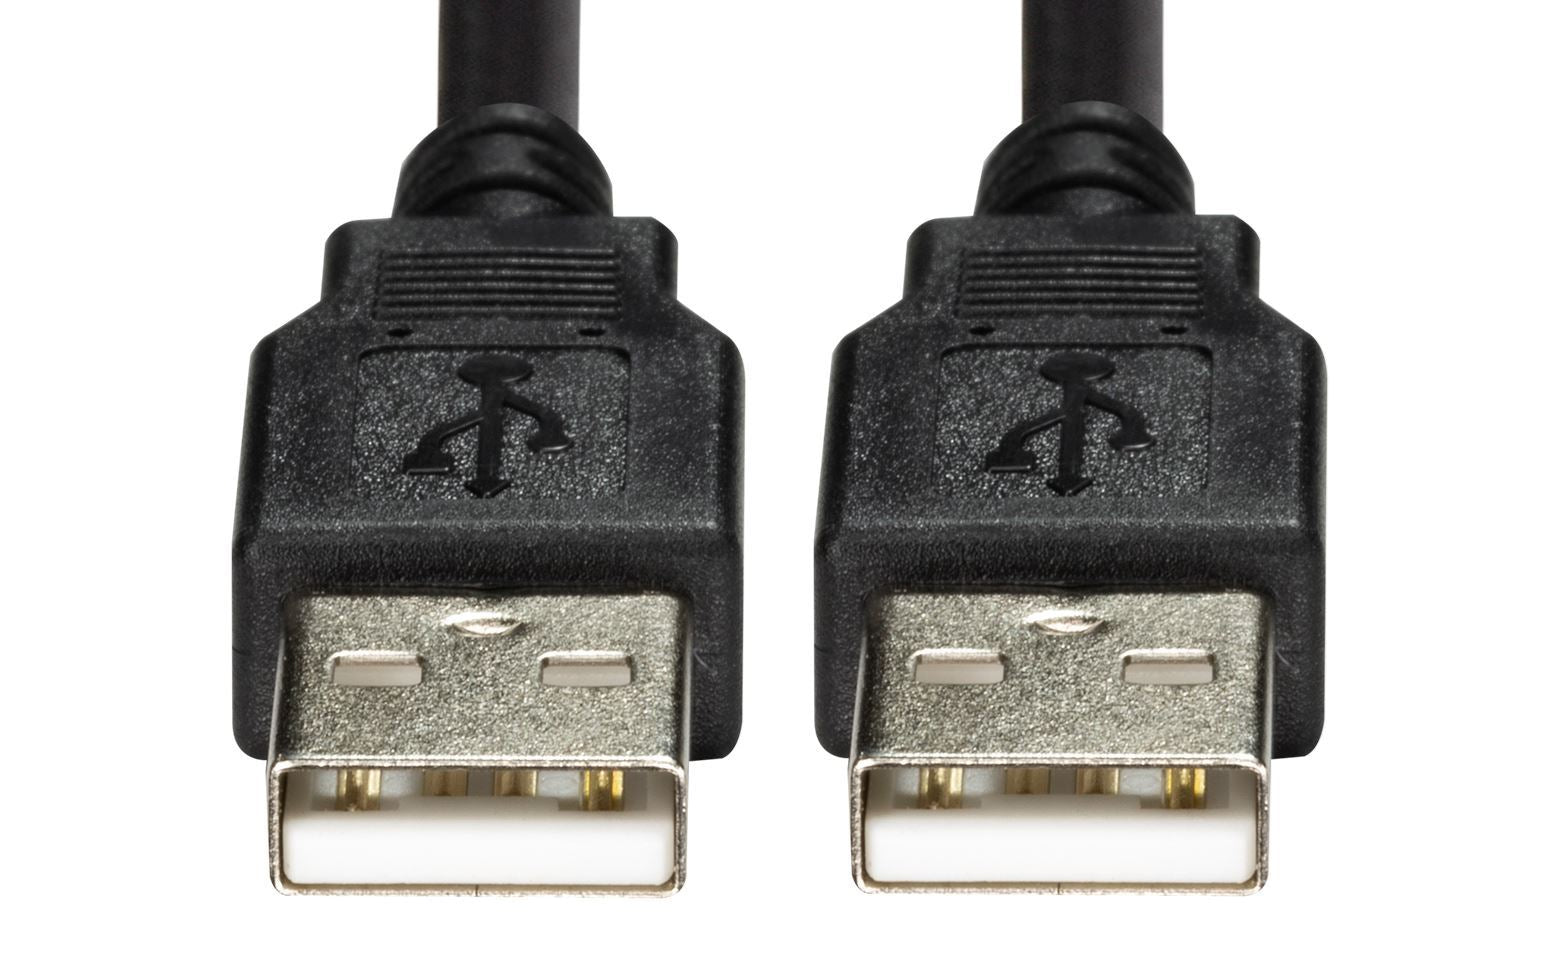 DYNAMIX_2m_USB_2.0_USB-A_Male_to_USB-A_Male_Cable 1058